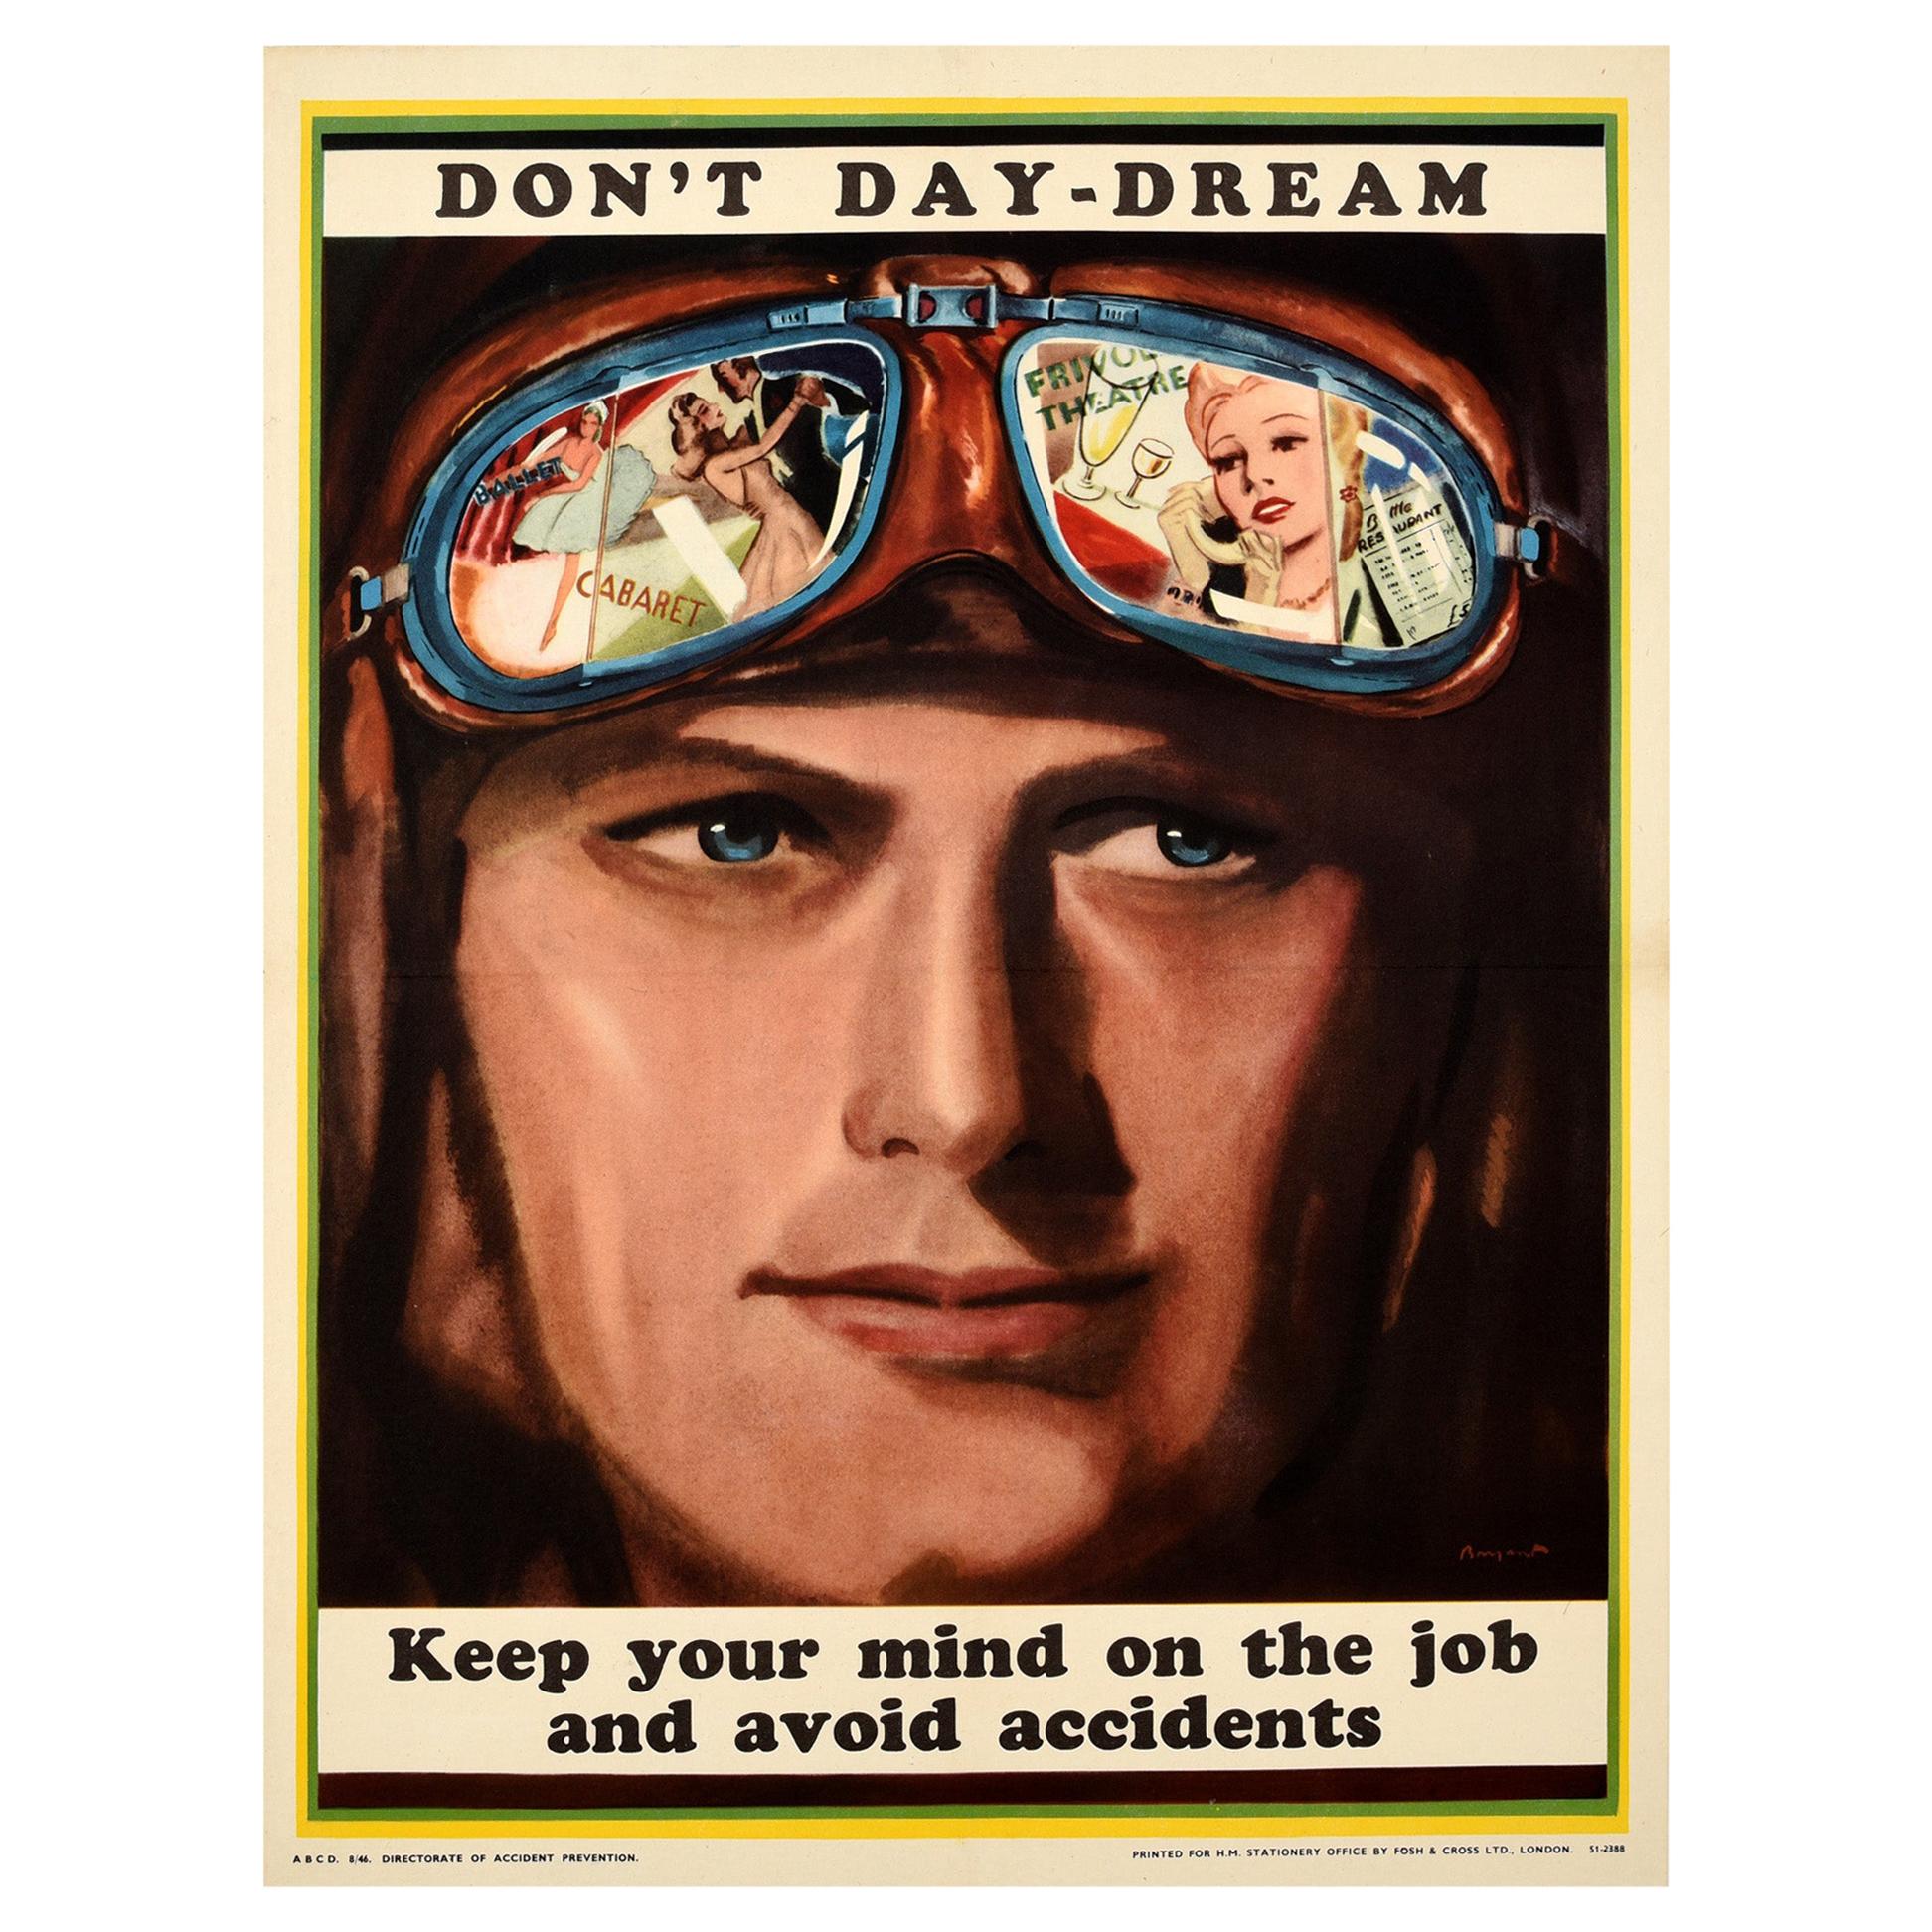 Original Vintage Poster Don't Day-Dream WWII Air Force Pilot Safety Propaganda